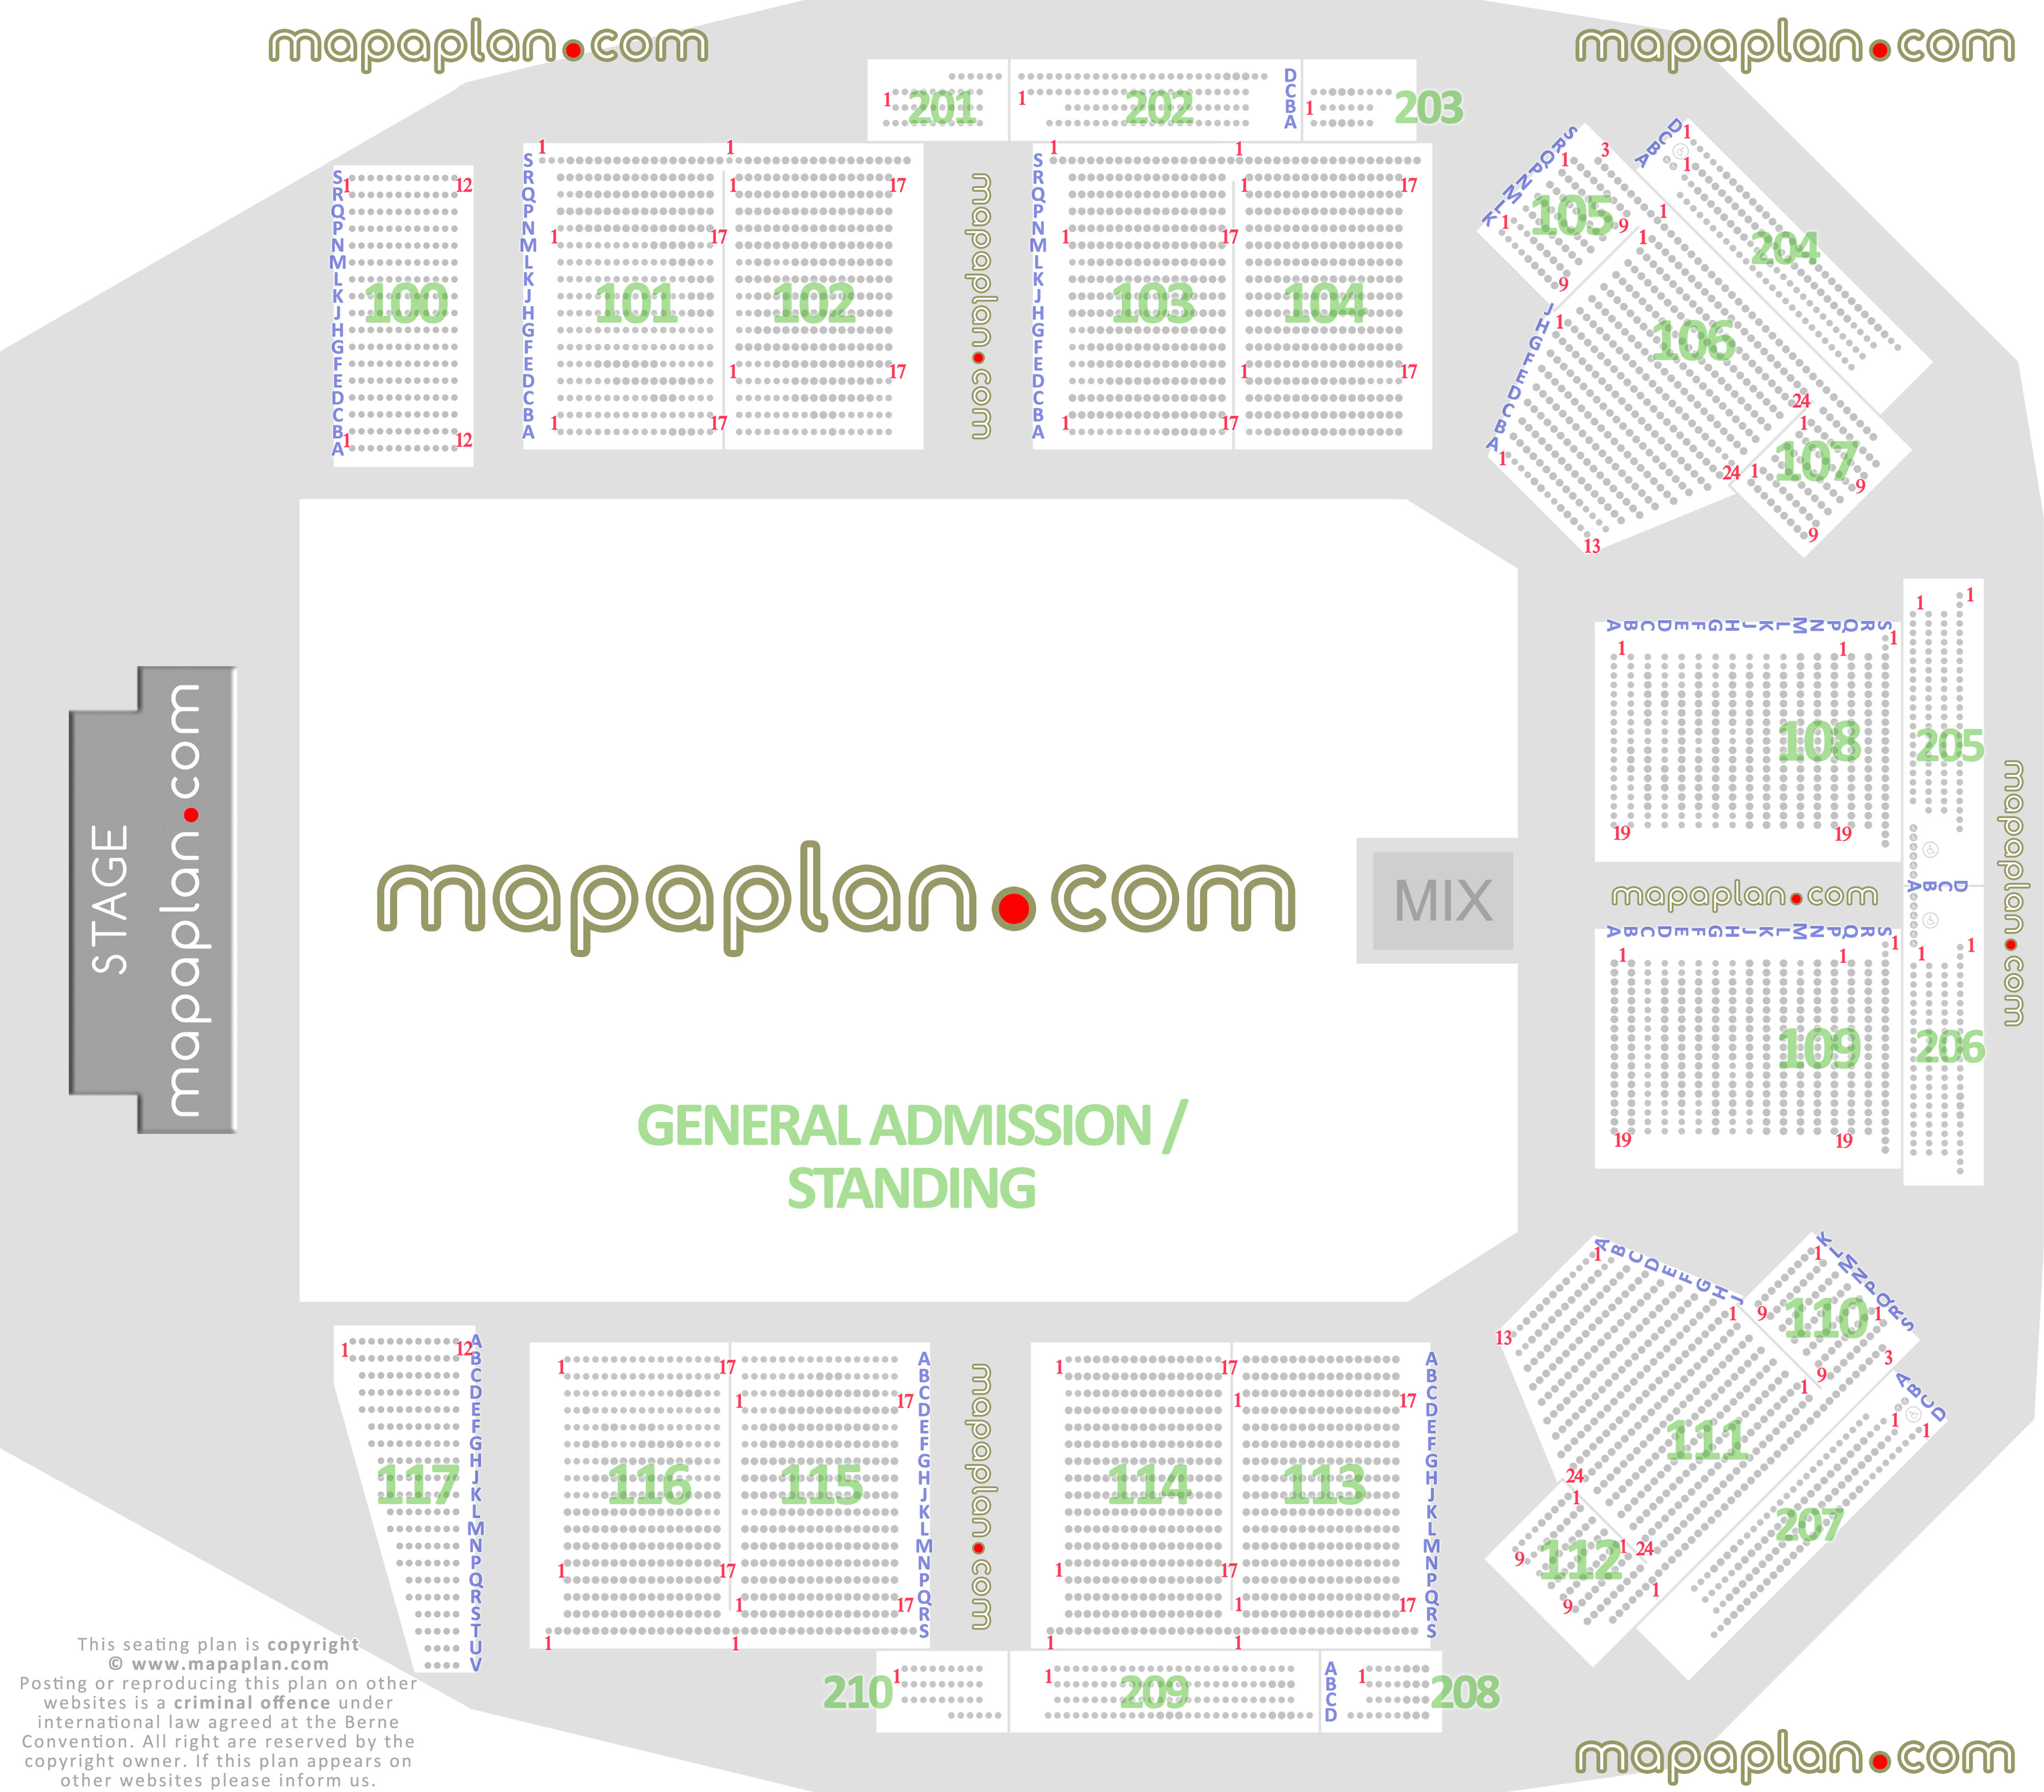 Aberdeen P&J Live seating chart general admission standing floor plan concerts arena diagram individual find seat locator seats row best seats rows numbered sections